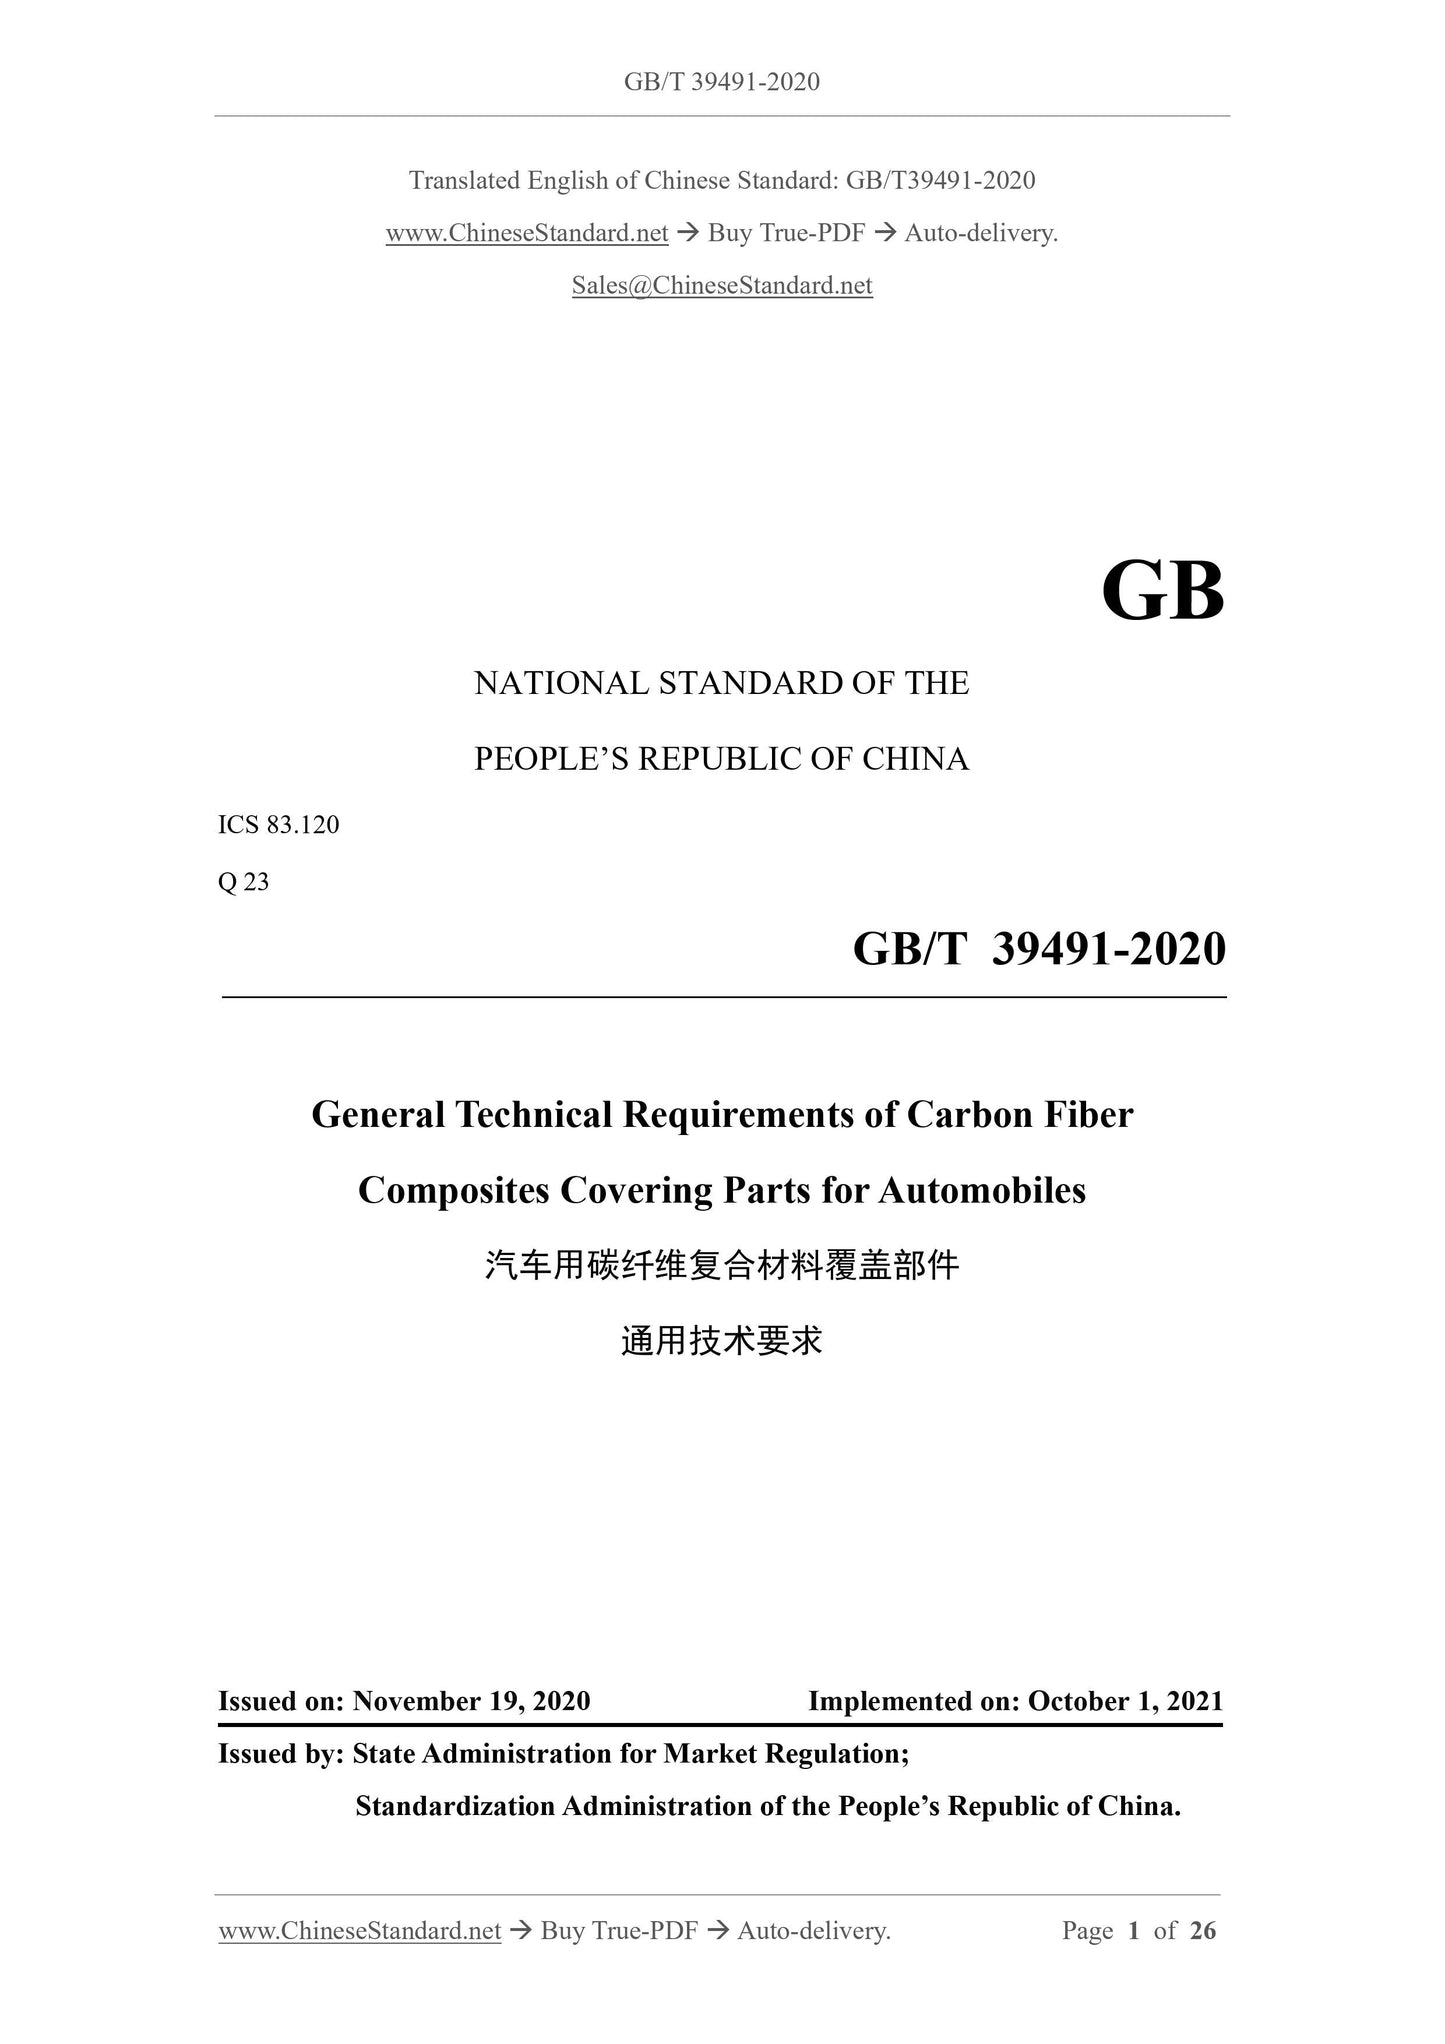 GB/T 39491-2020 Page 1